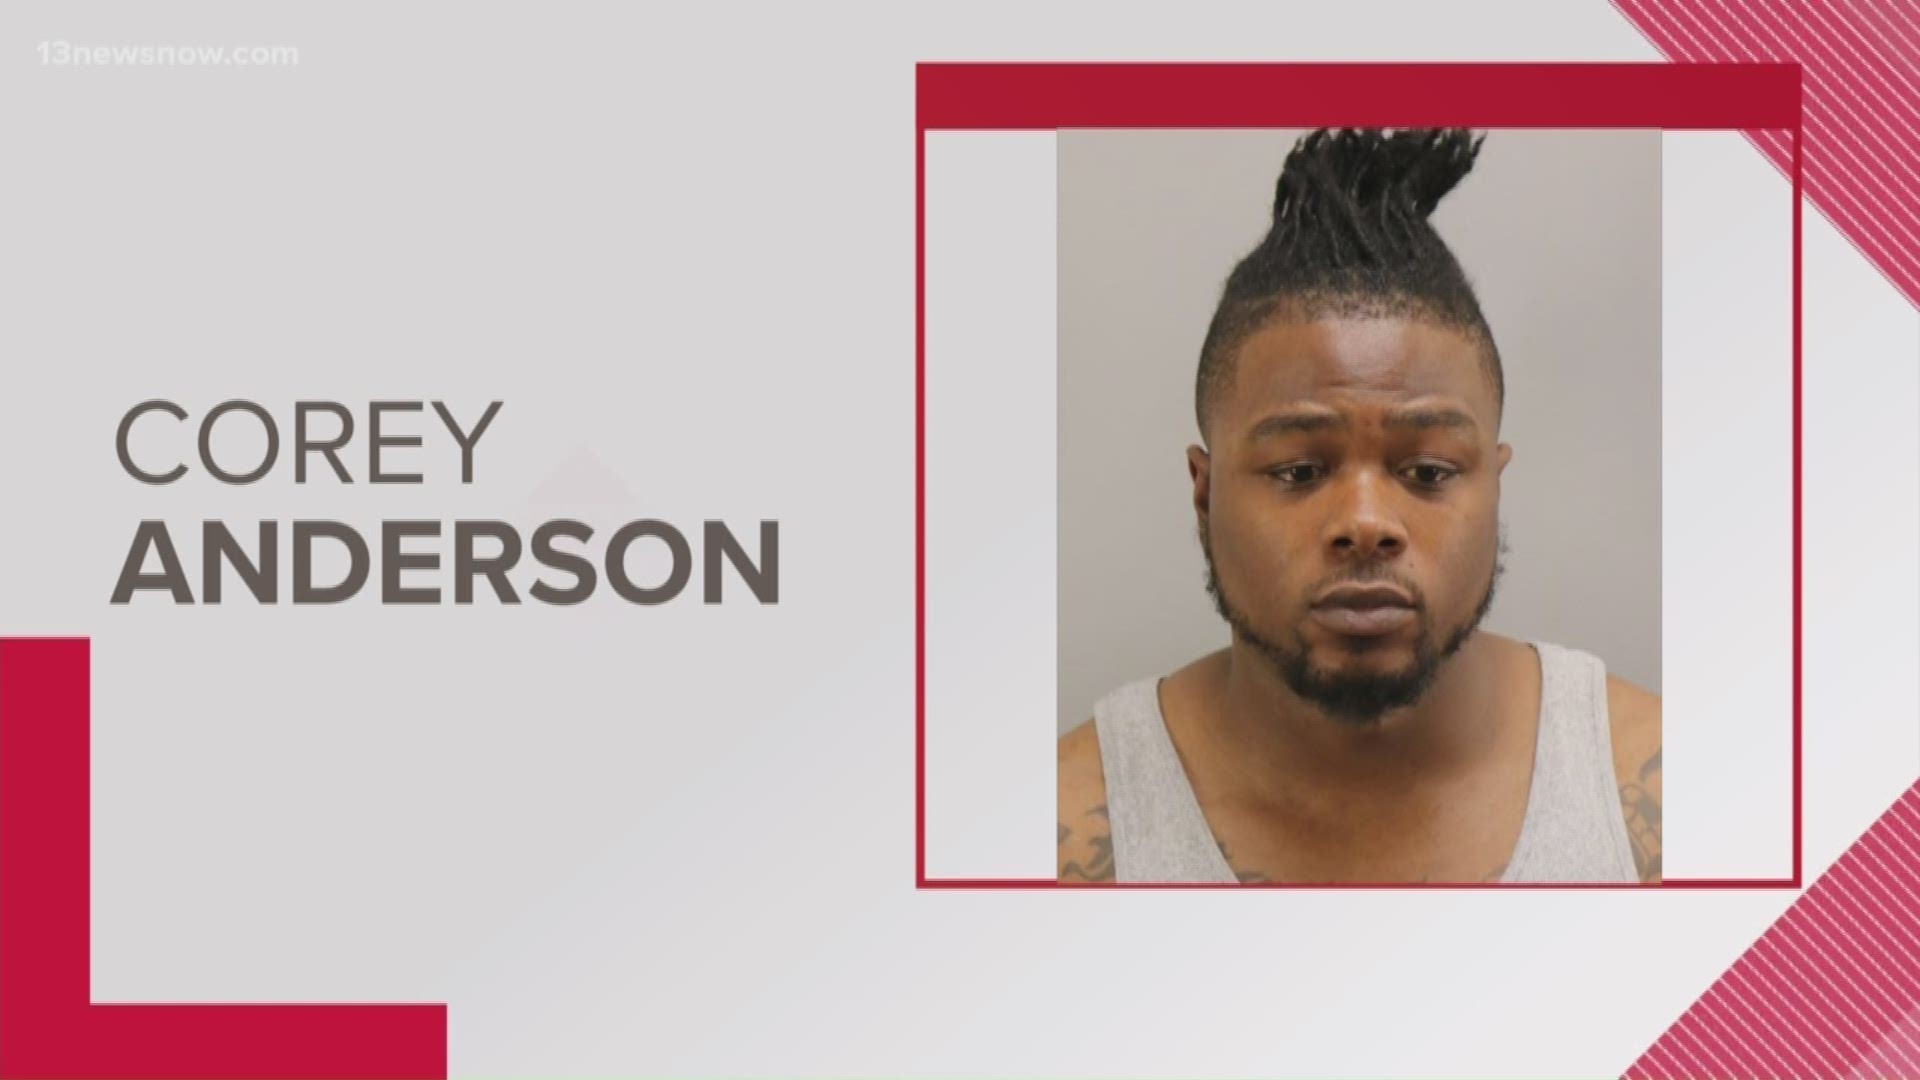 Corey Anderson faces multiple charges after a shooting in North Great Neck Road in Virginia Beach left three people injured.